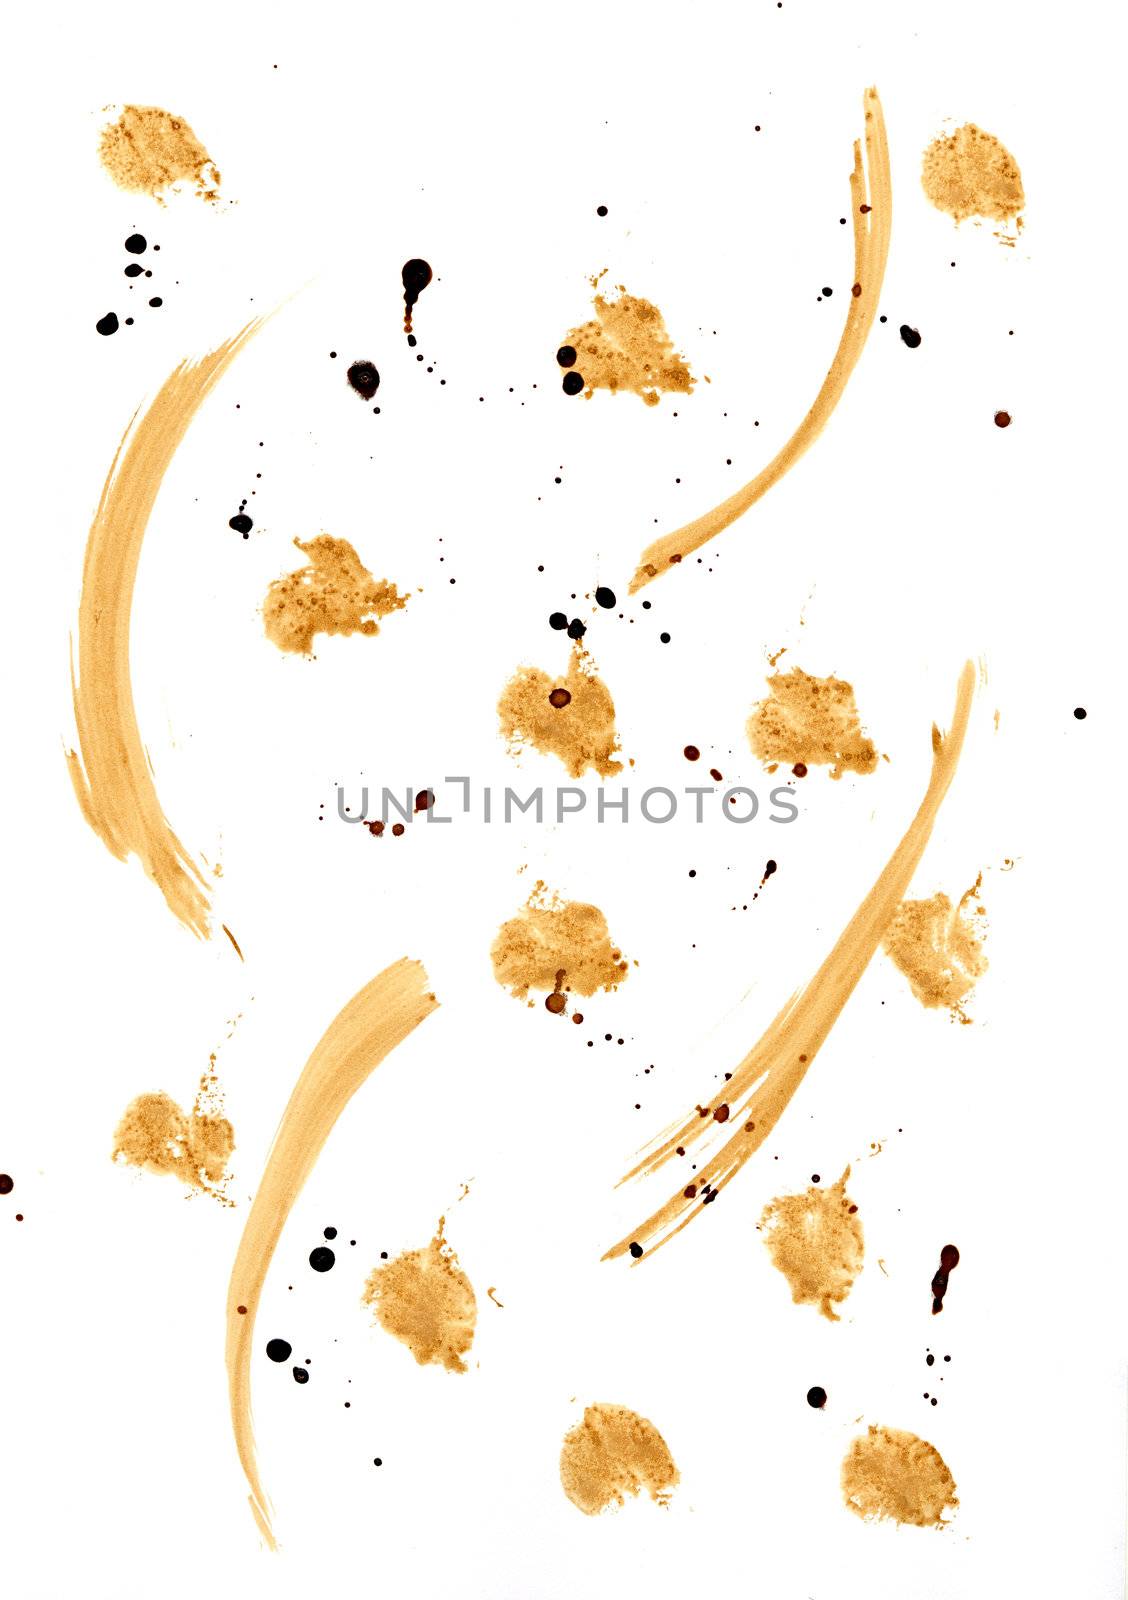 Collection of coffee splashes and stains isolated on white background.